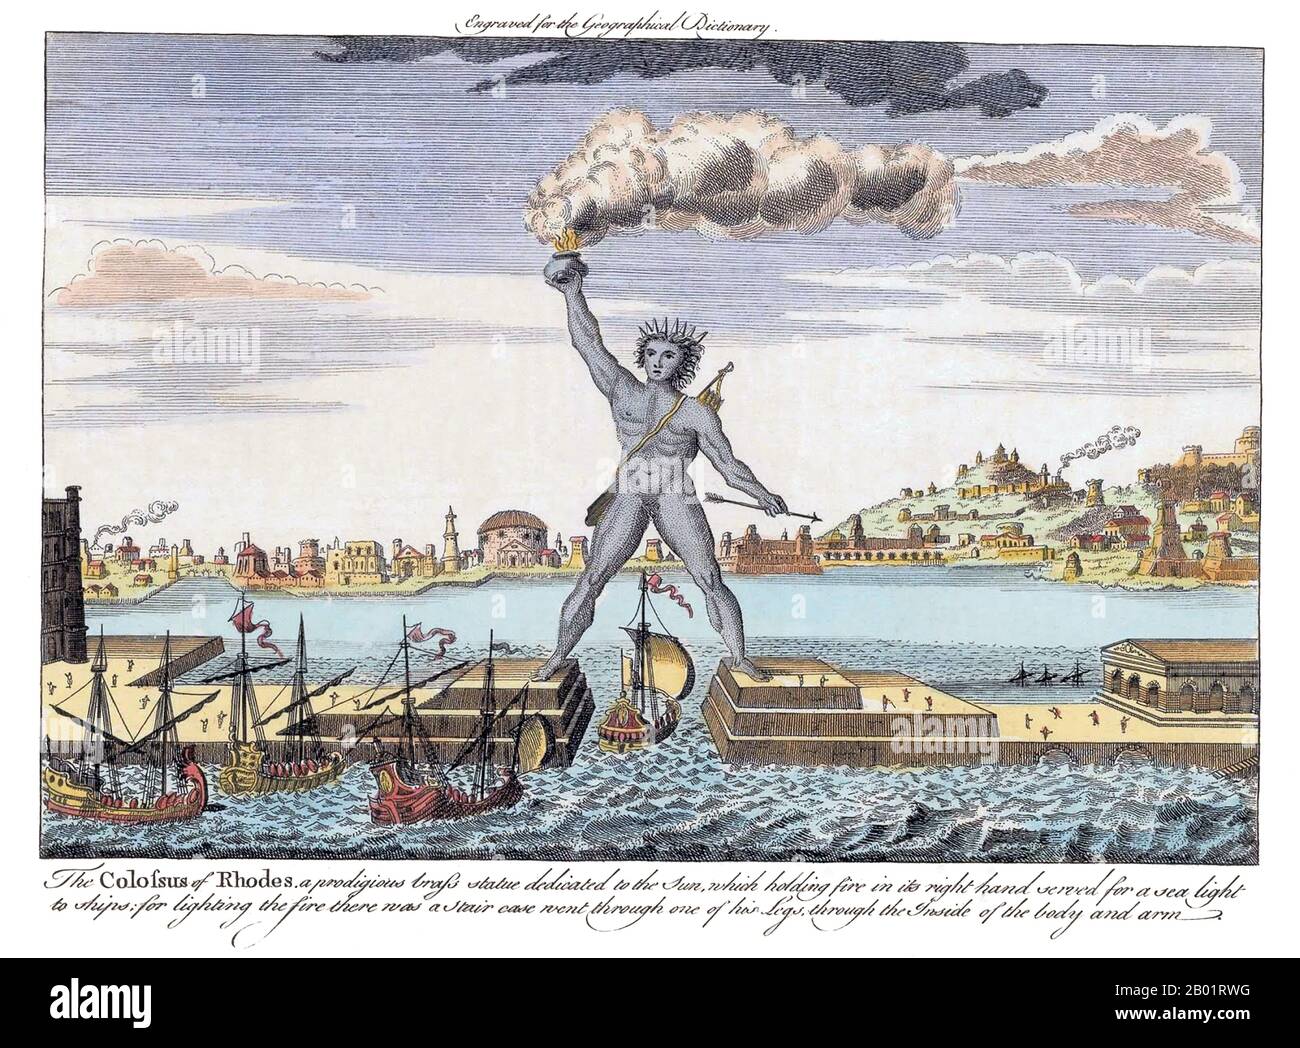 Greece: 'The Colossus of Rhodes'. Engraving in the New Geographical Dictionary, 1790.  The Colossus of Rhodes was a statue of the Greek god Helios, erected in the city of Rhodes by Chares of Lindos between 292 and 280 BCE. It is considered one of the Seven Wonders of the Ancient World. It was constructed to celebrate Rhodes' victory over the ruler of Cyprus, Antigonus I Monophthalmus, whose son unsuccessfully besieged Rhodes in 305 BCE. Before its destruction, the Colossus of Rhodes stood over 30 metres (107 ft) high, making it one of the tallest statues of the ancient world. Stock Photo